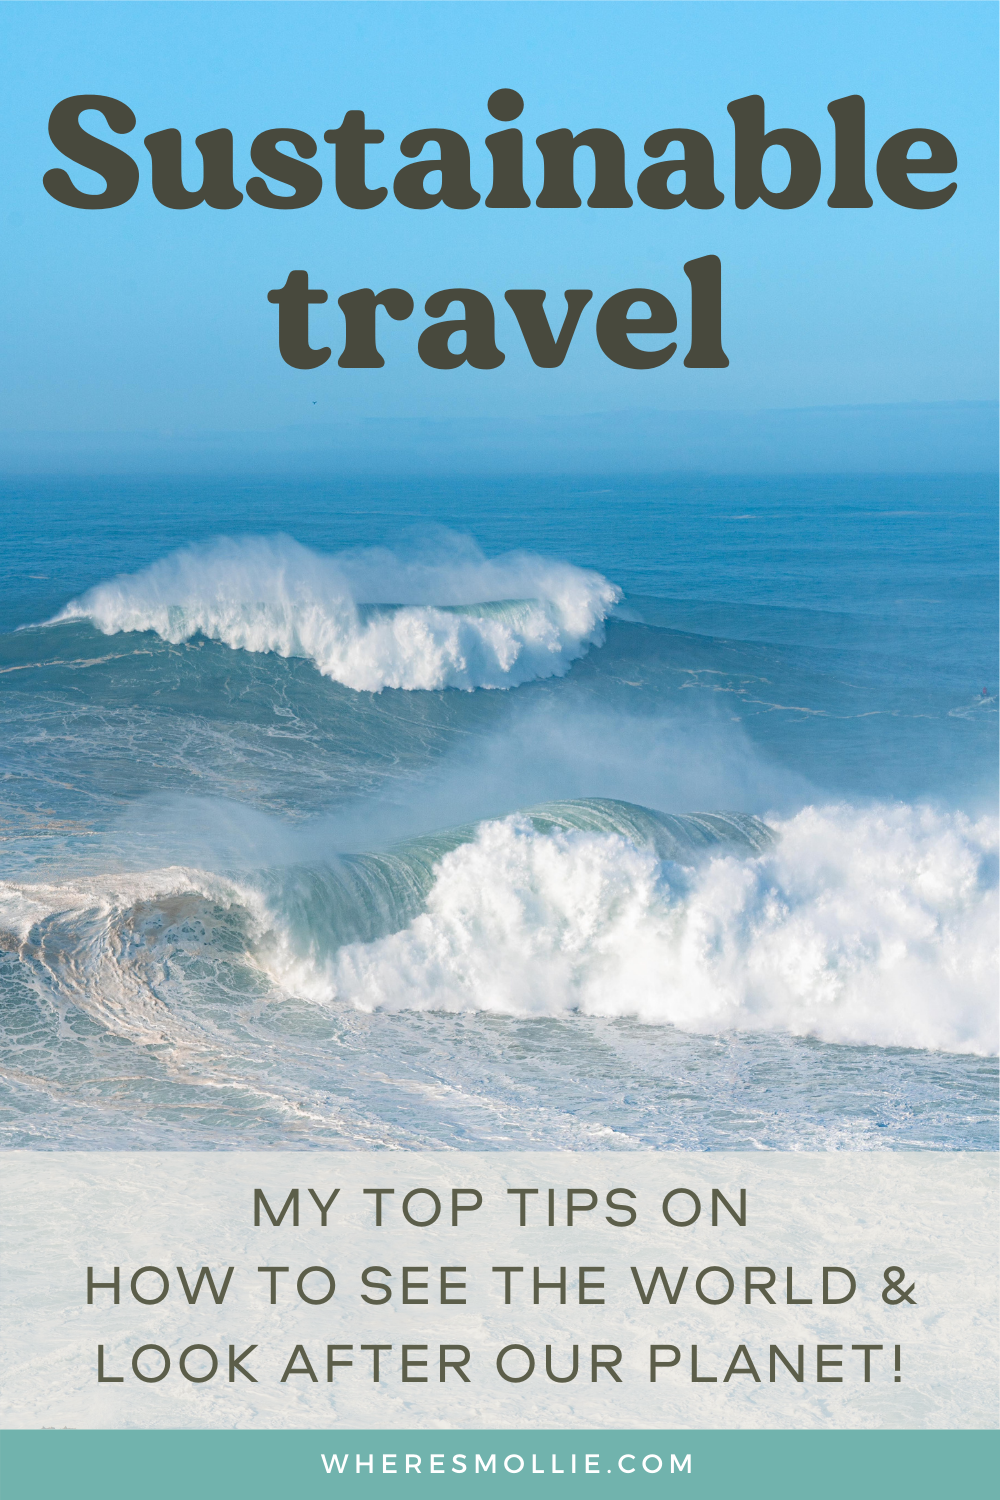 15 top tips for sustainable travel